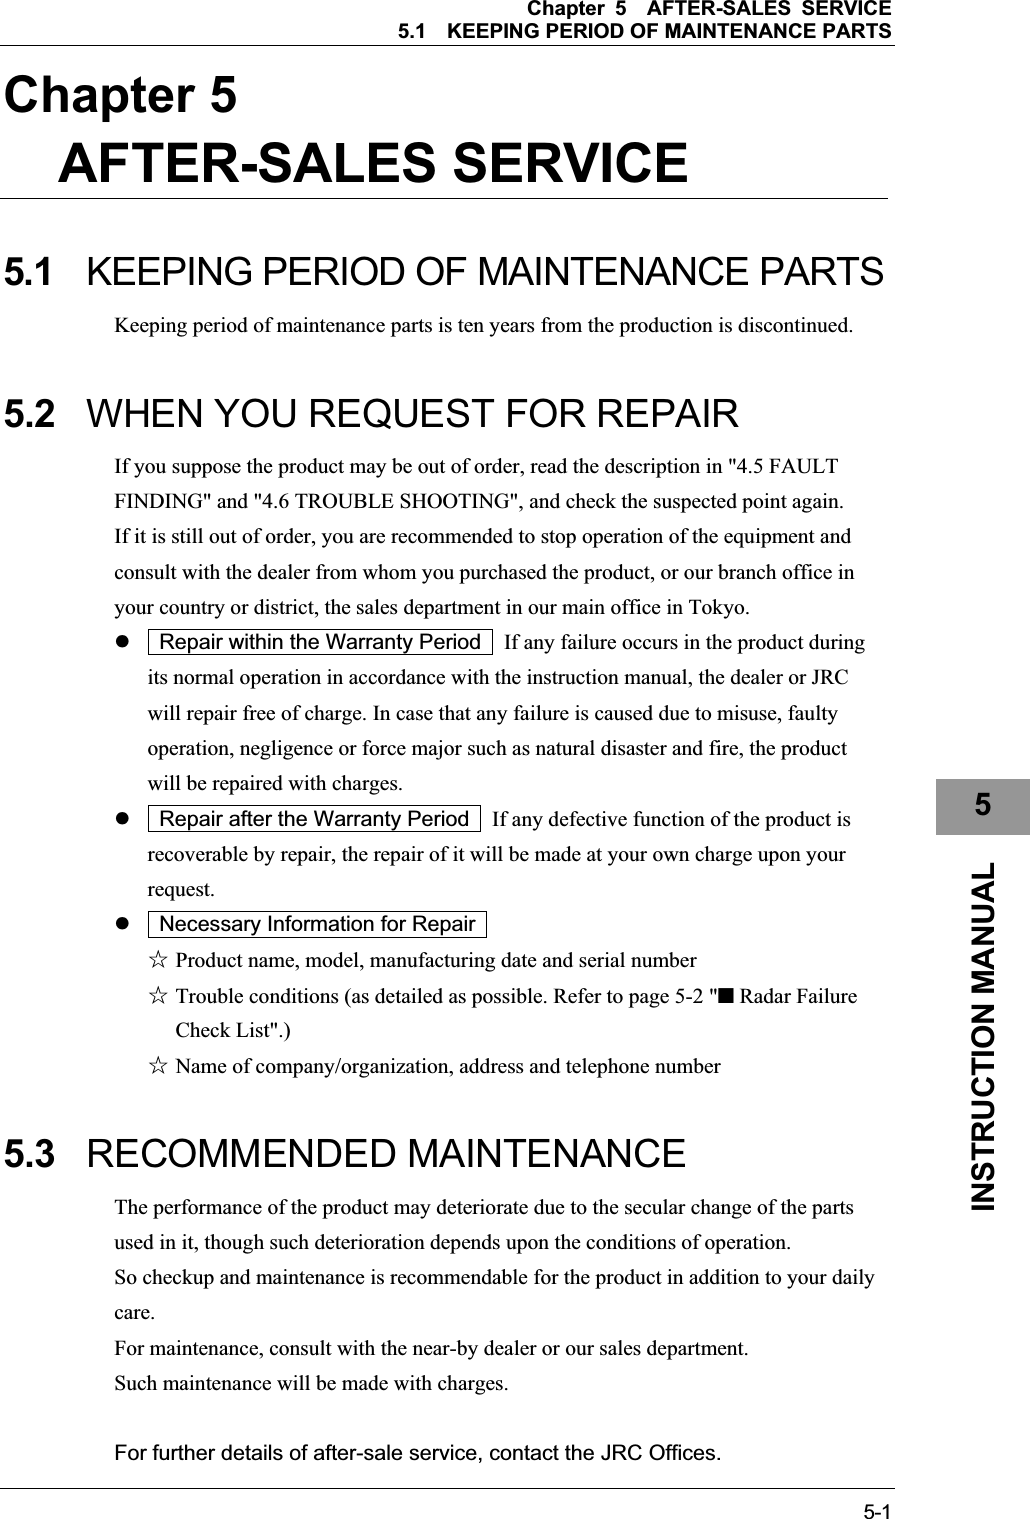 Chapter 5AFTER-SALES SERVICE 5.1KEEPING PERIOD OF MAINTENANCE PARTS 5-15INSTRUCTION MANUAL Chapter 5AFTER-SALES SERVICE 5.1 KEEPING PERIOD OF MAINTENANCE PARTS Keeping period of maintenance parts is ten years from the production is discontinued. 5.2 WHEN YOU REQUEST FOR REPAIR If you suppose the product may be out of order, read the description in &quot;4.5 FAULT FINDING&quot; and &quot;4.6 TROUBLE SHOOTING&quot;, and check the suspected point again. If it is still out of order, you are recommended to stop operation of the equipment and consult with the dealer from whom you purchased the product, or our branch office in your country or district, the sales department in our main office in Tokyo. z    Repair within the Warranty Period    If any failure occurs in the product during its normal operation in accordance with the instruction manual, the dealer or JRC will repair free of charge. In case that any failure is caused due to misuse, faulty operation, negligence or force major such as natural disaster and fire, the product will be repaired with charges. z    Repair after the Warranty Period    If any defective function of the product is recoverable by repair, the repair of it will be made at your own charge upon your request.z    Necessary Information for Repair ۼ Product name, model, manufacturing date and serial number ۼ Trouble conditions (as detailed as possible. Refer to page 5-2 &quot;■ Radar Failure Check List&quot;.) ۼ Name of company/organization, address and telephone number 5.3 RECOMMENDED MAINTENANCE The performance of the product may deteriorate due to the secular change of the parts used in it, though such deterioration depends upon the conditions of operation. So checkup and maintenance is recommendable for the product in addition to your daily care.For maintenance, consult with the near-by dealer or our sales department. Such maintenance will be made with charges. For further details of after-sale service, contact the JRC Offices. 